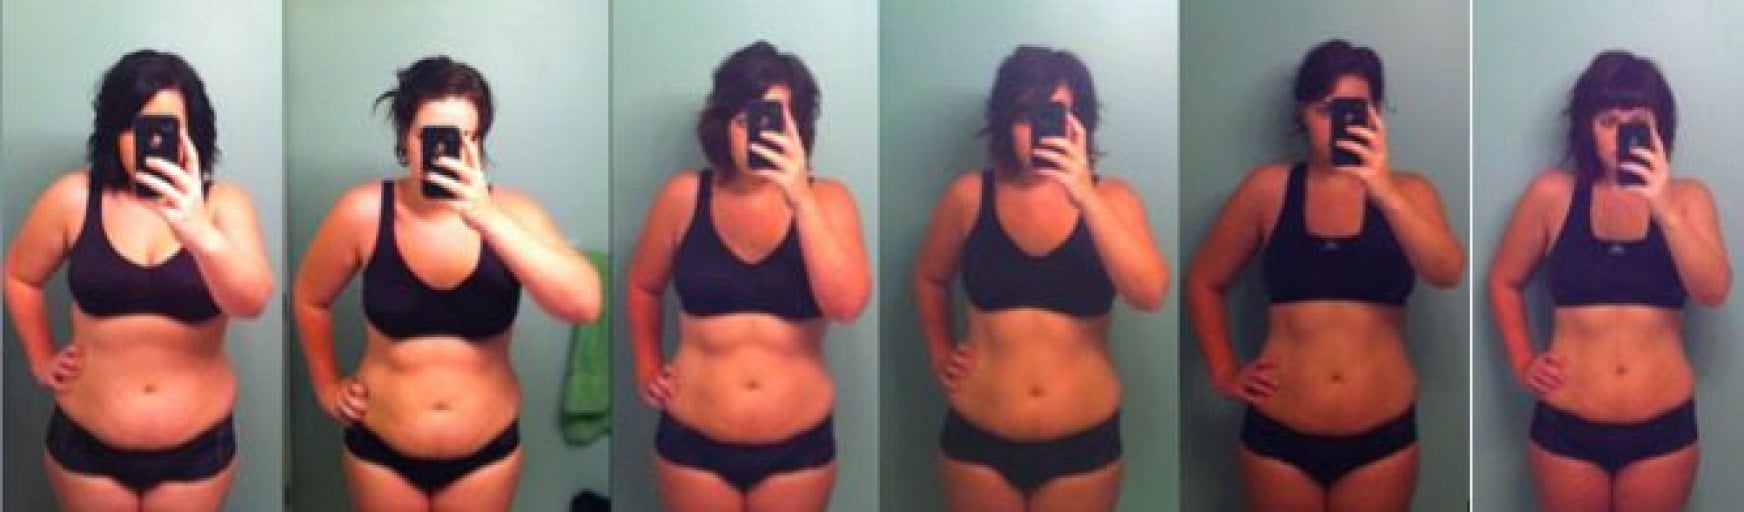 5'10 Female 66 lbs Weight Loss Before and After 265 lbs to 199 lbs